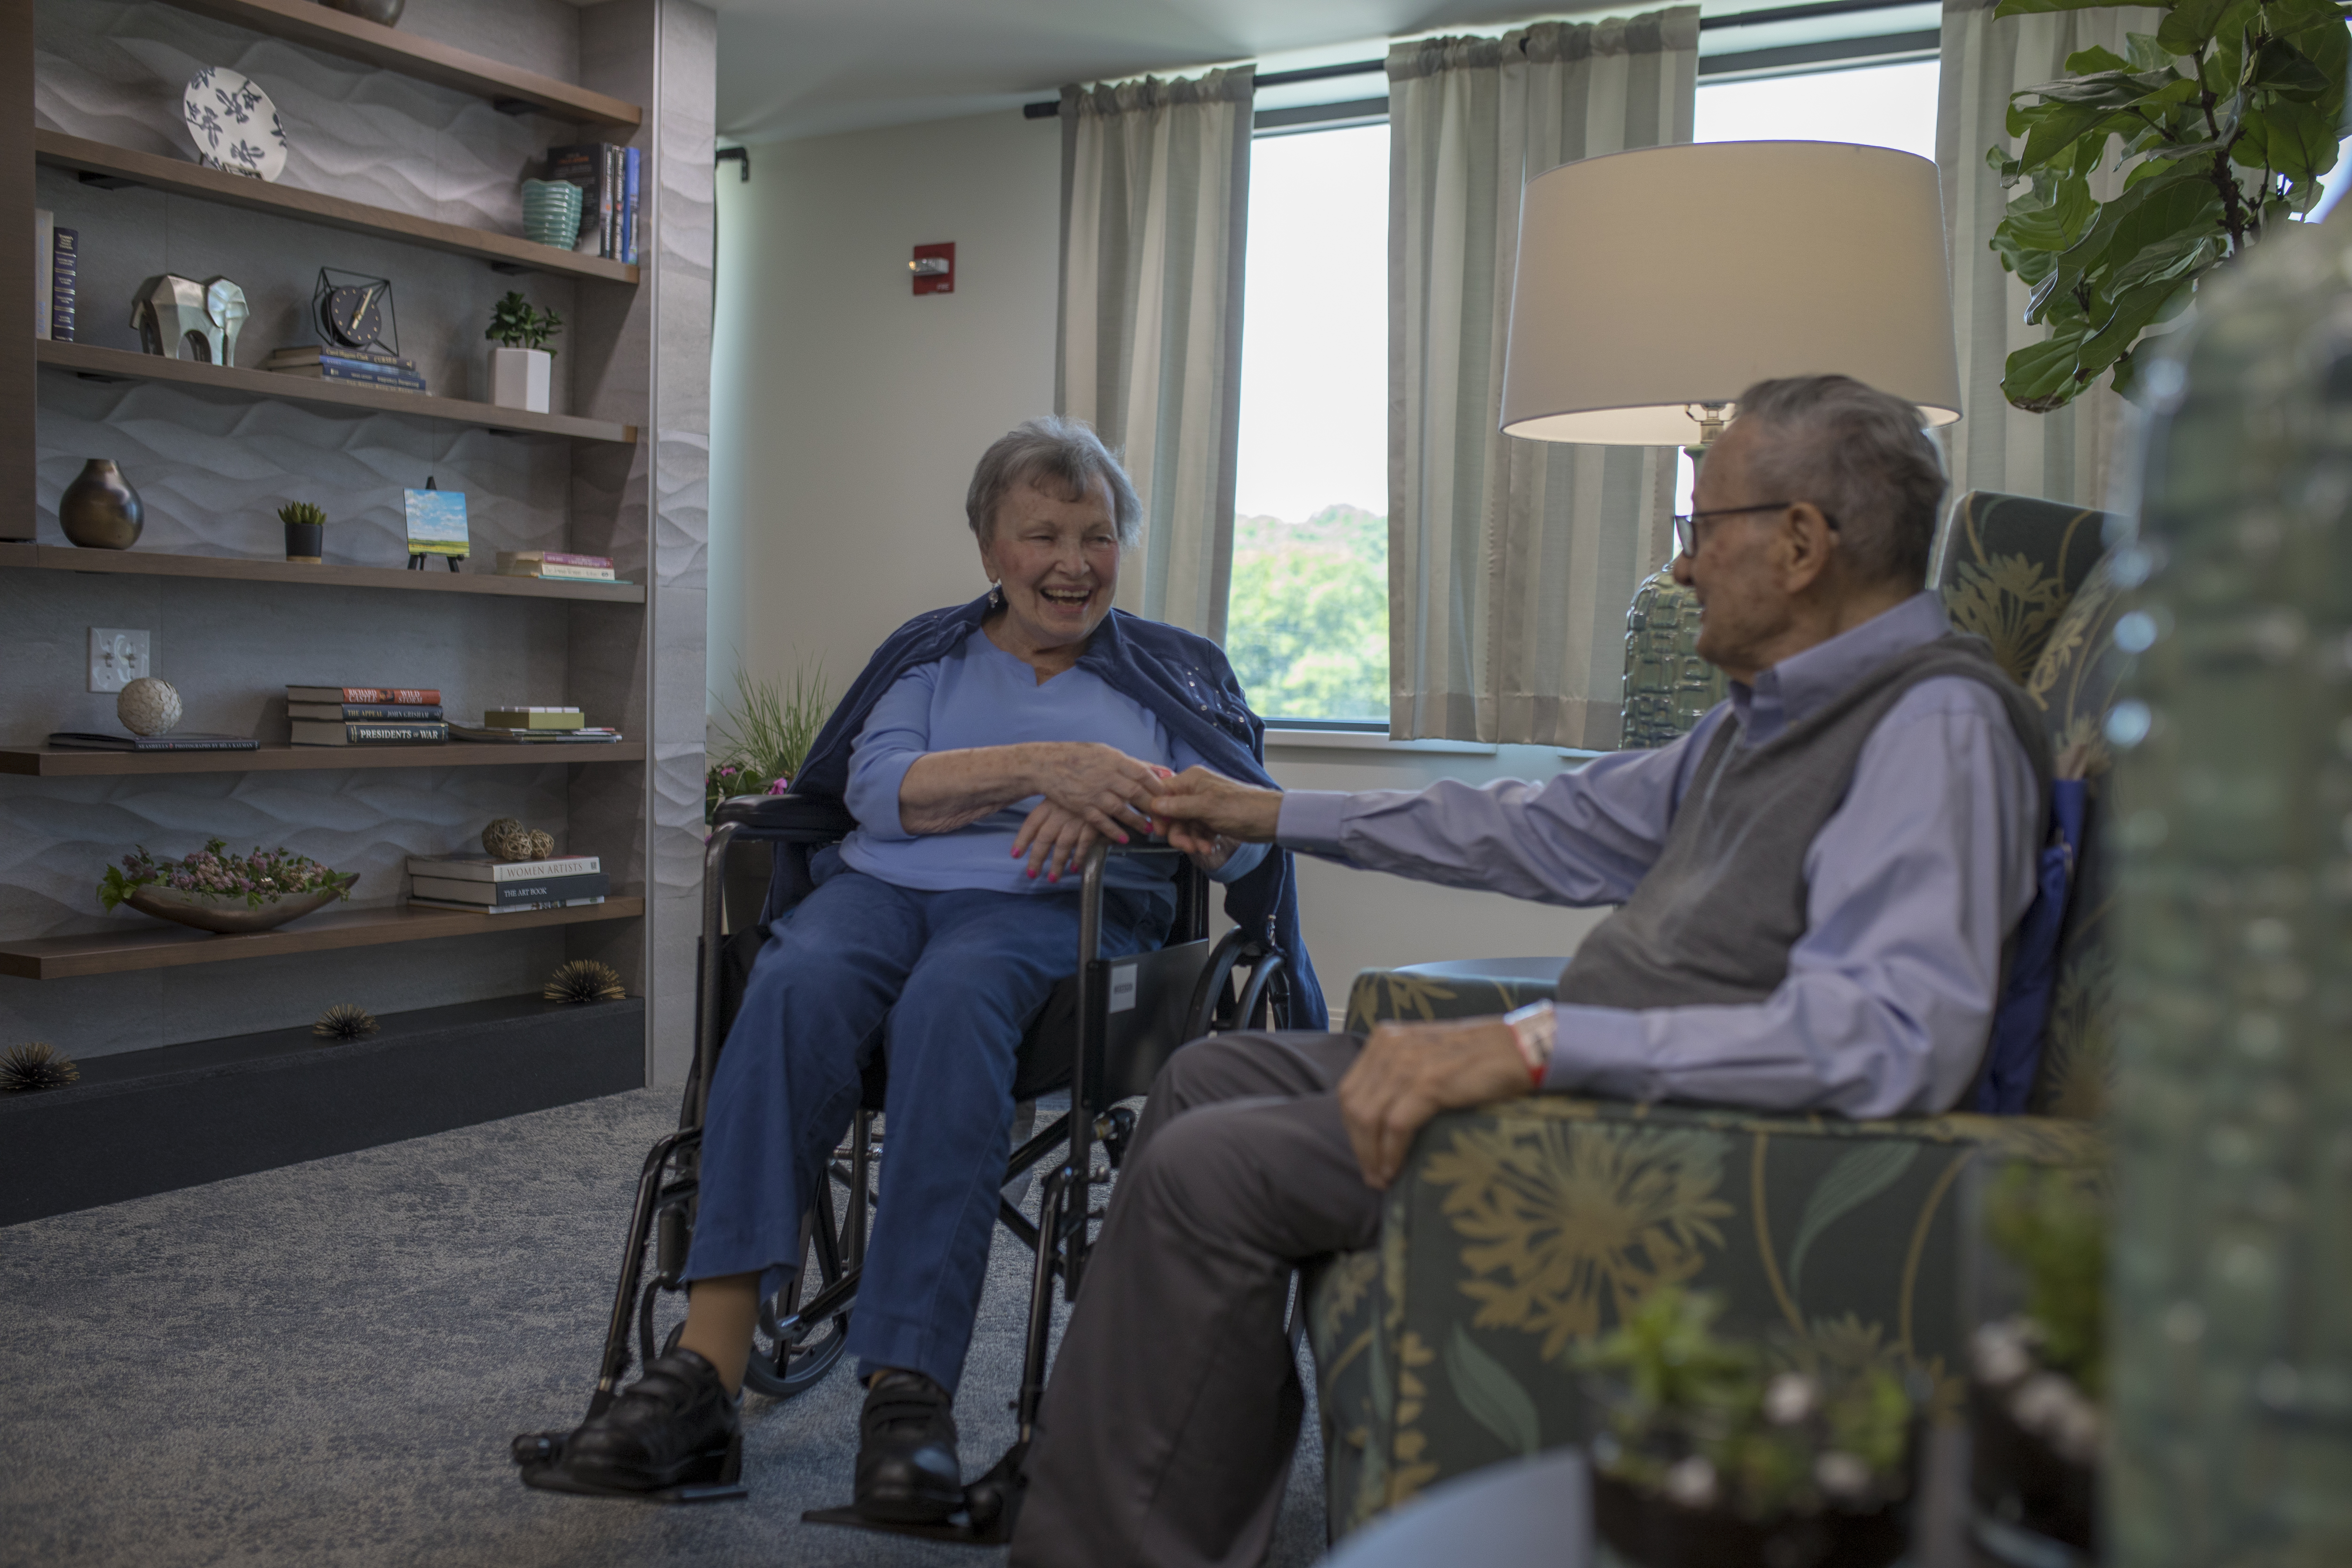 Assisted Living, Senior Living, Home Care and Caregiver Support